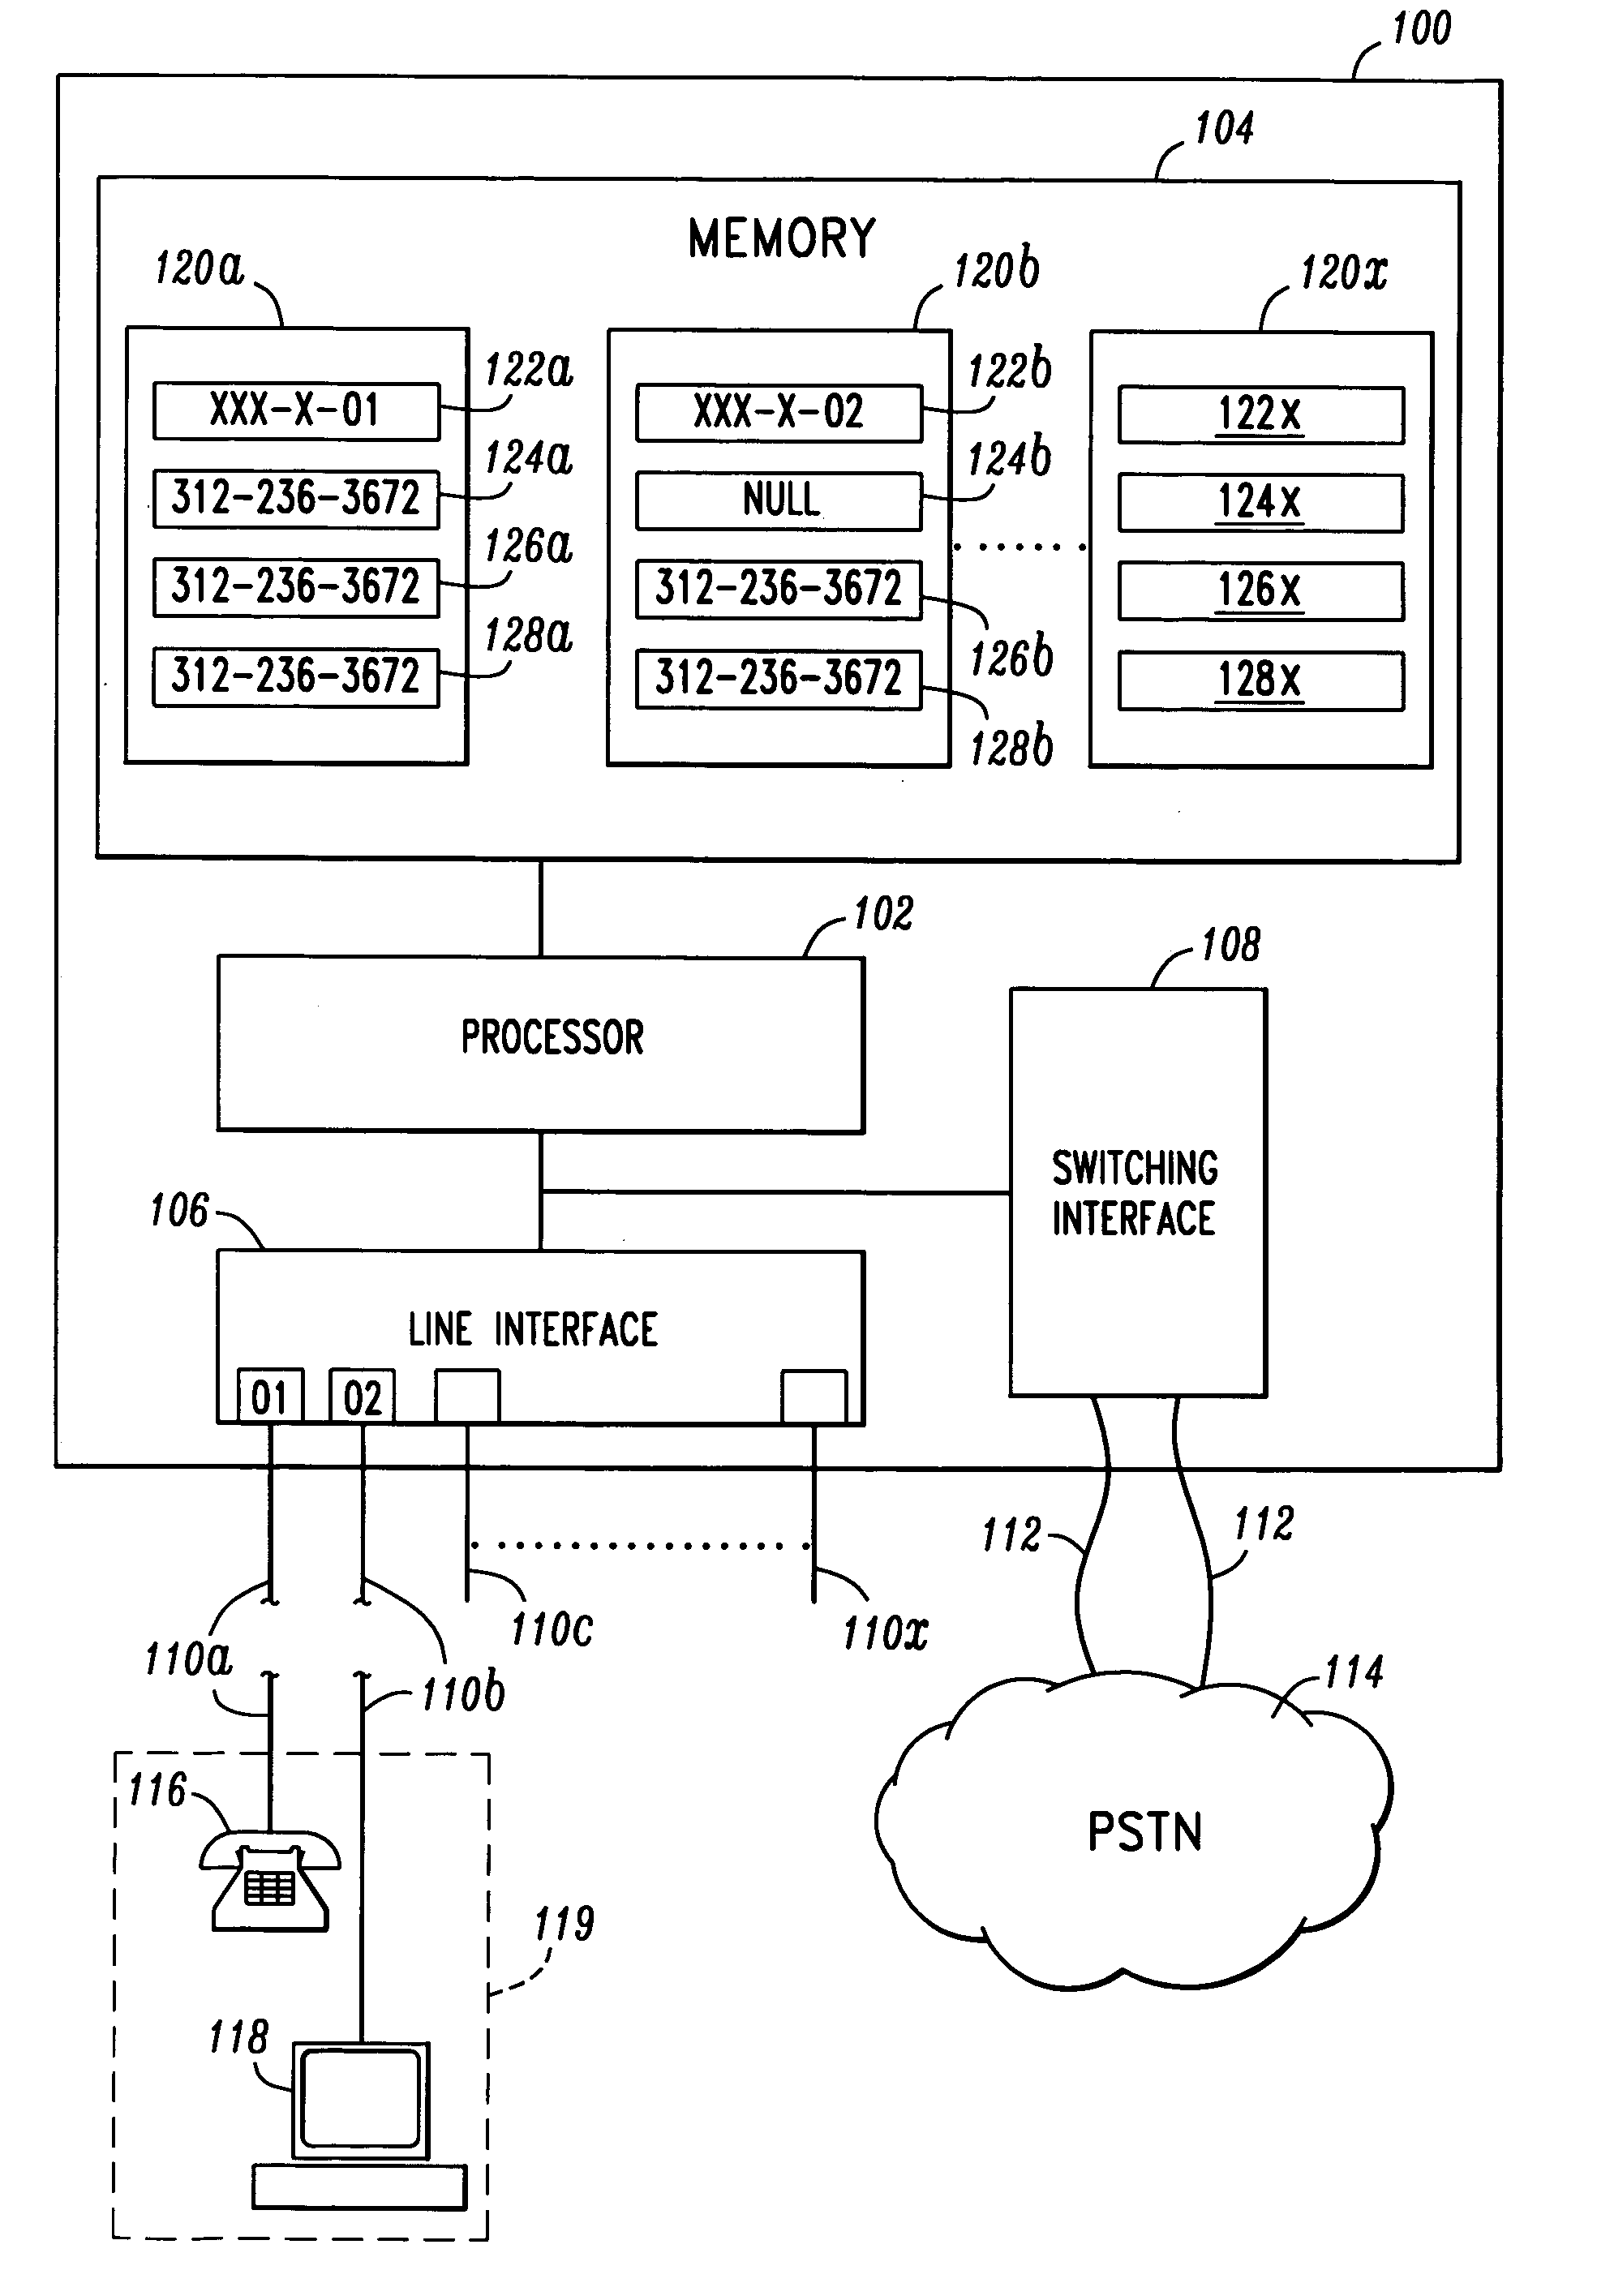 Method and apparatus for assigning telephone numbers